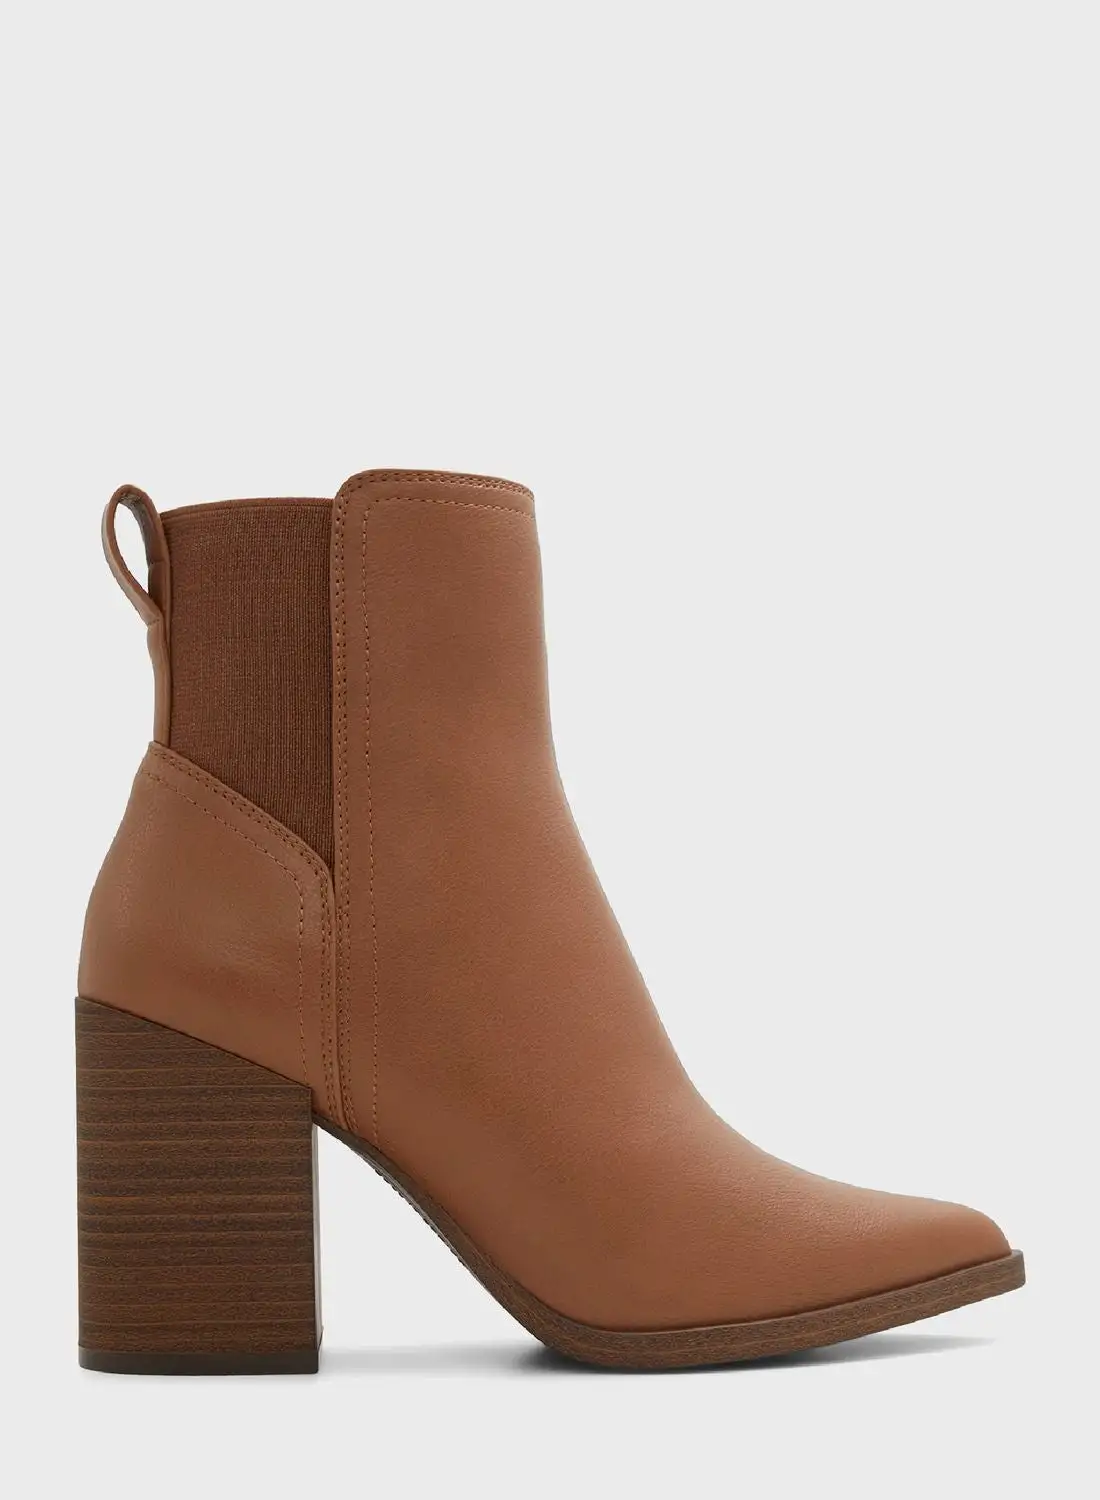 CALL IT SPRING Liza Ankle Boots